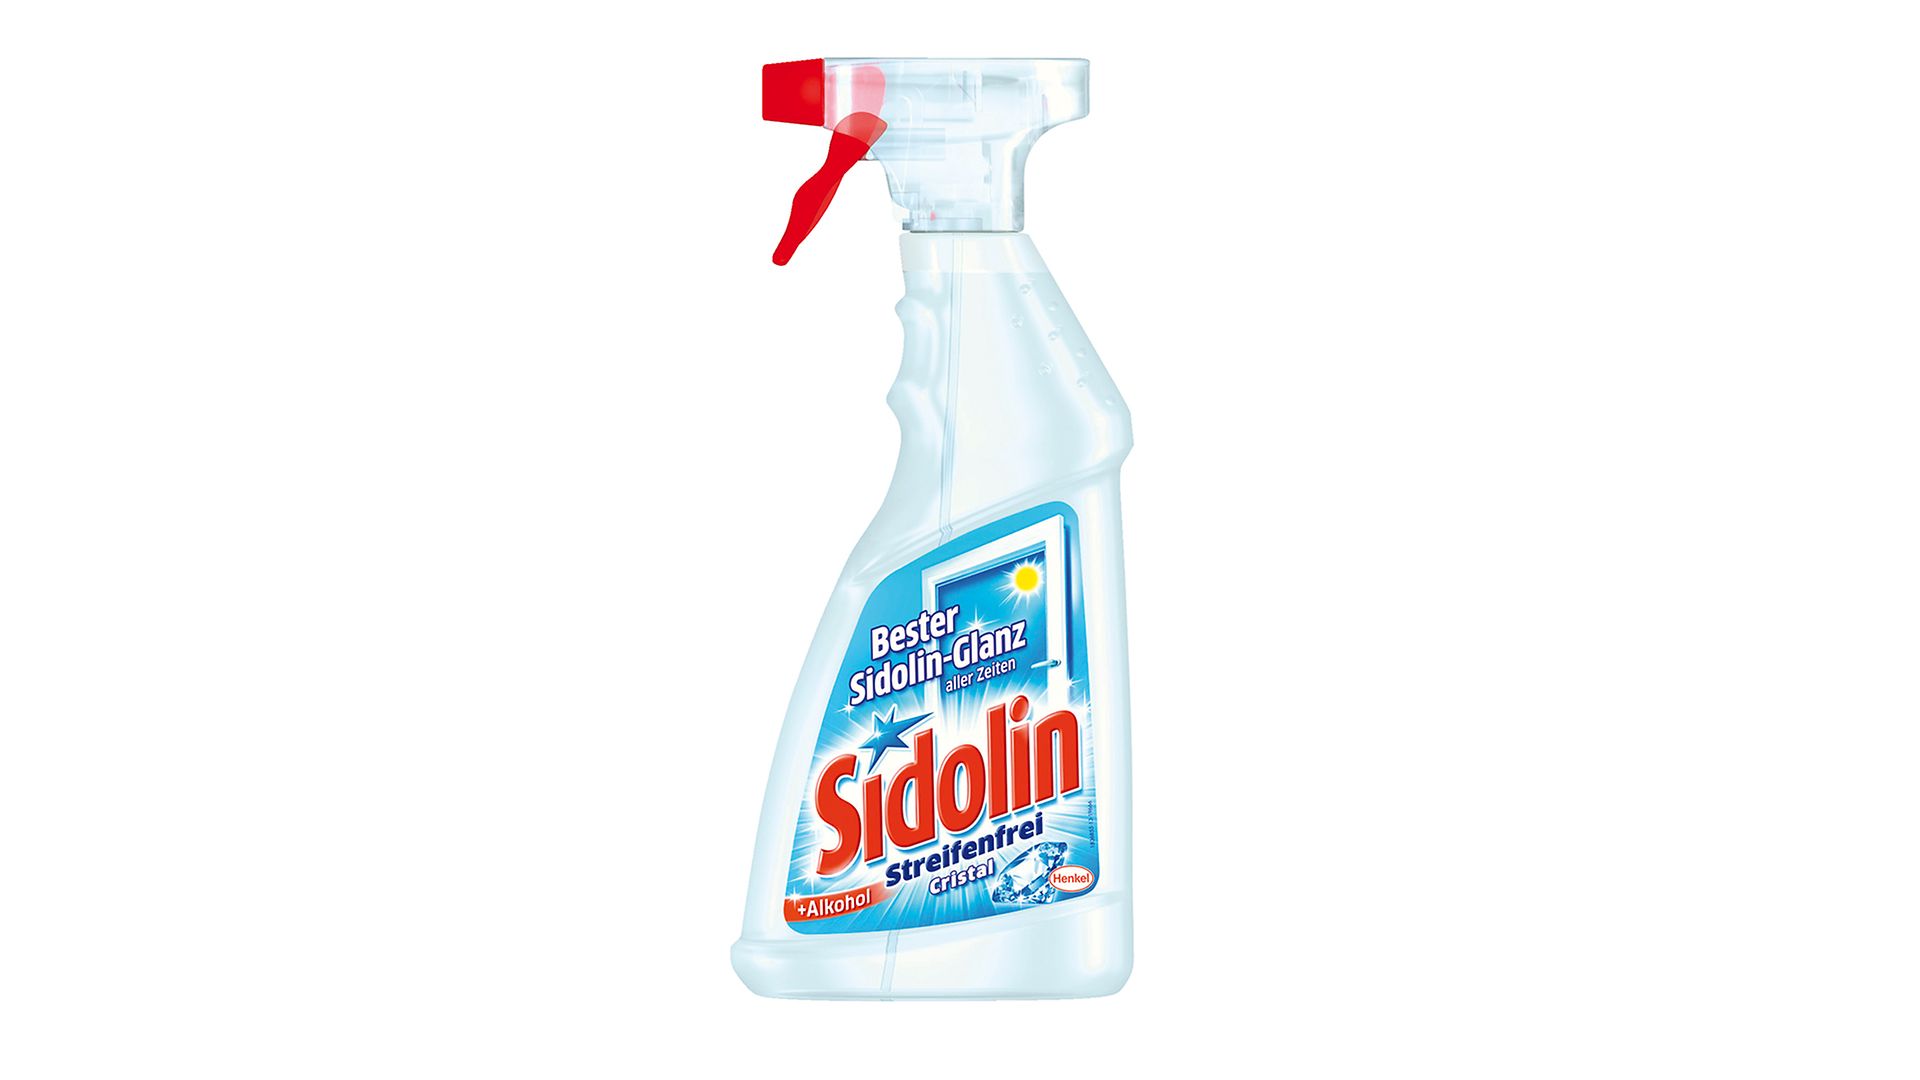 The brand “Sidolin" celebrated its 60th anniversary